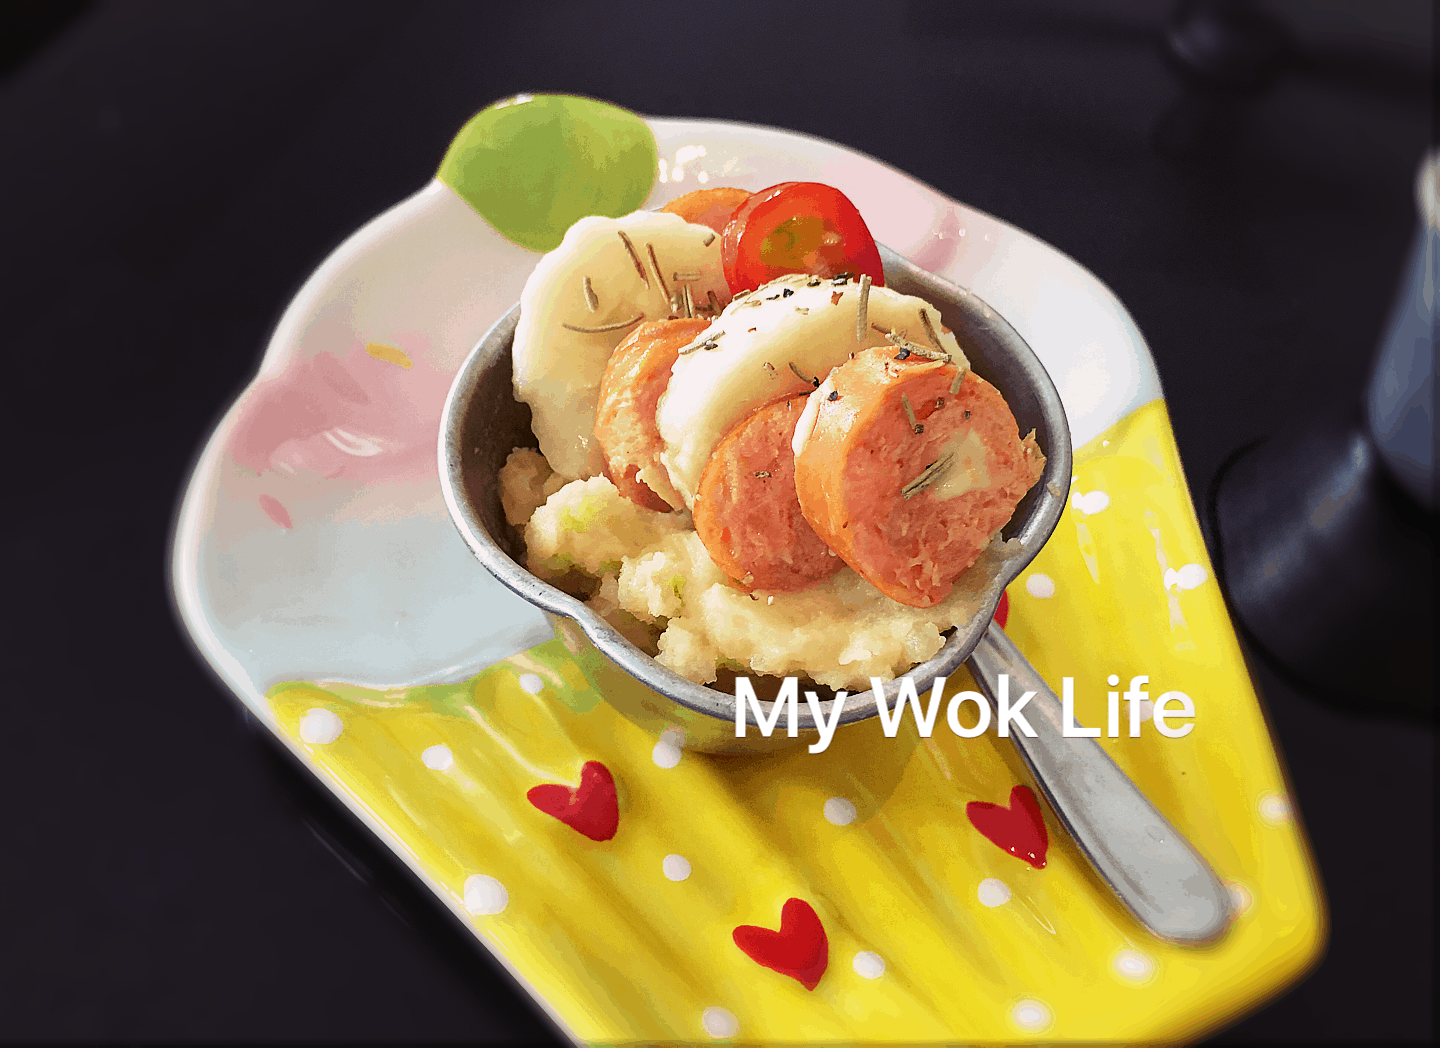 My Wok Life Cooking Blog - Mashed Potato In Cup -